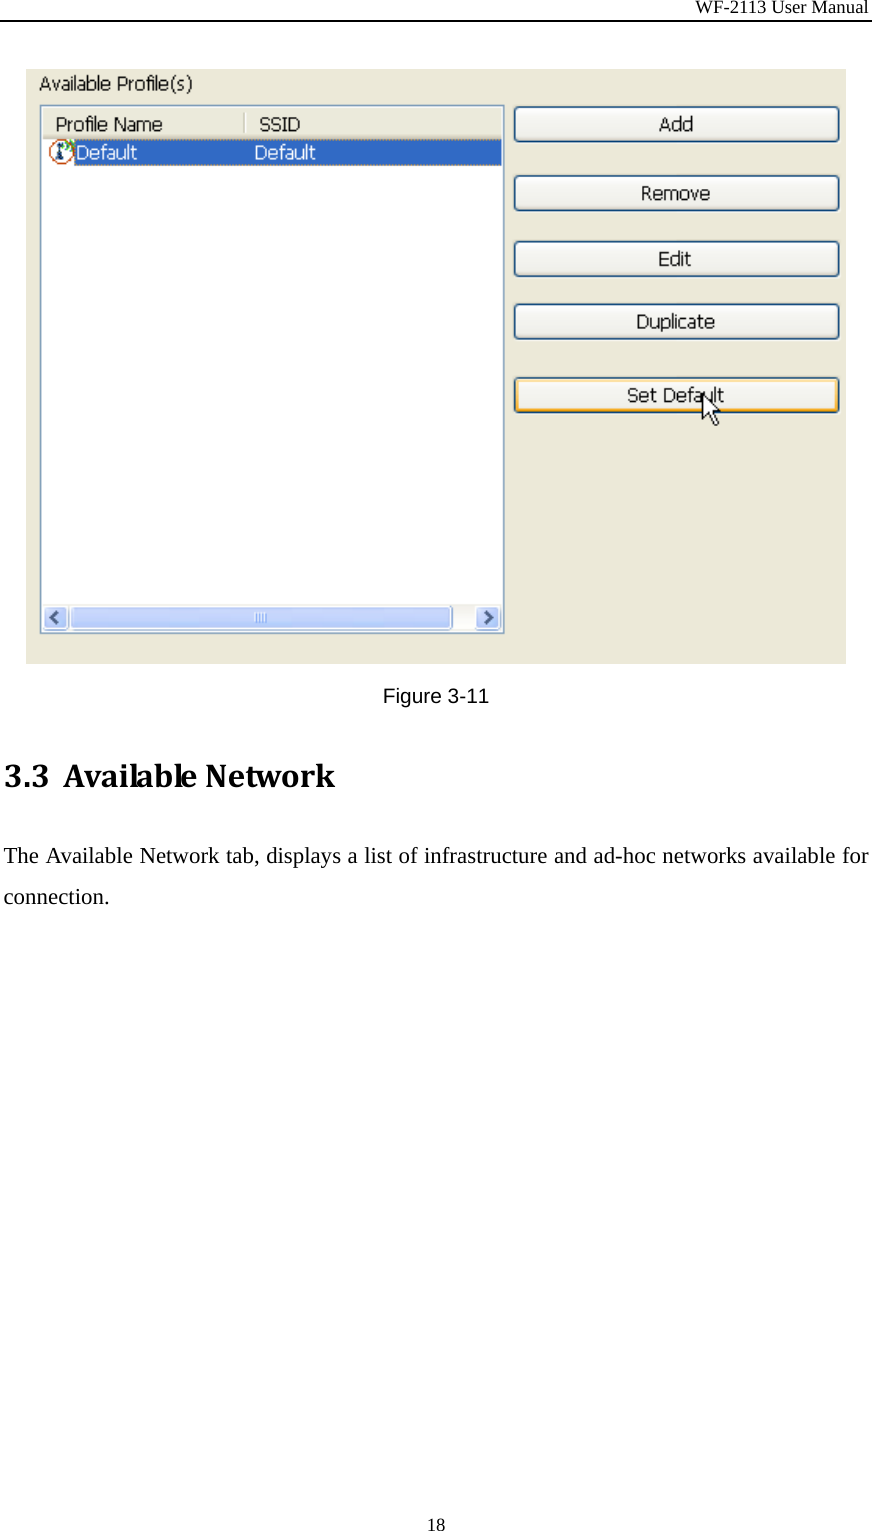 WF-2113 User Manual 18 Figure 3-11 3.3 AvailableNetworkThe Available Network tab, displays a list of infrastructure and ad-hoc networks available for connection. 